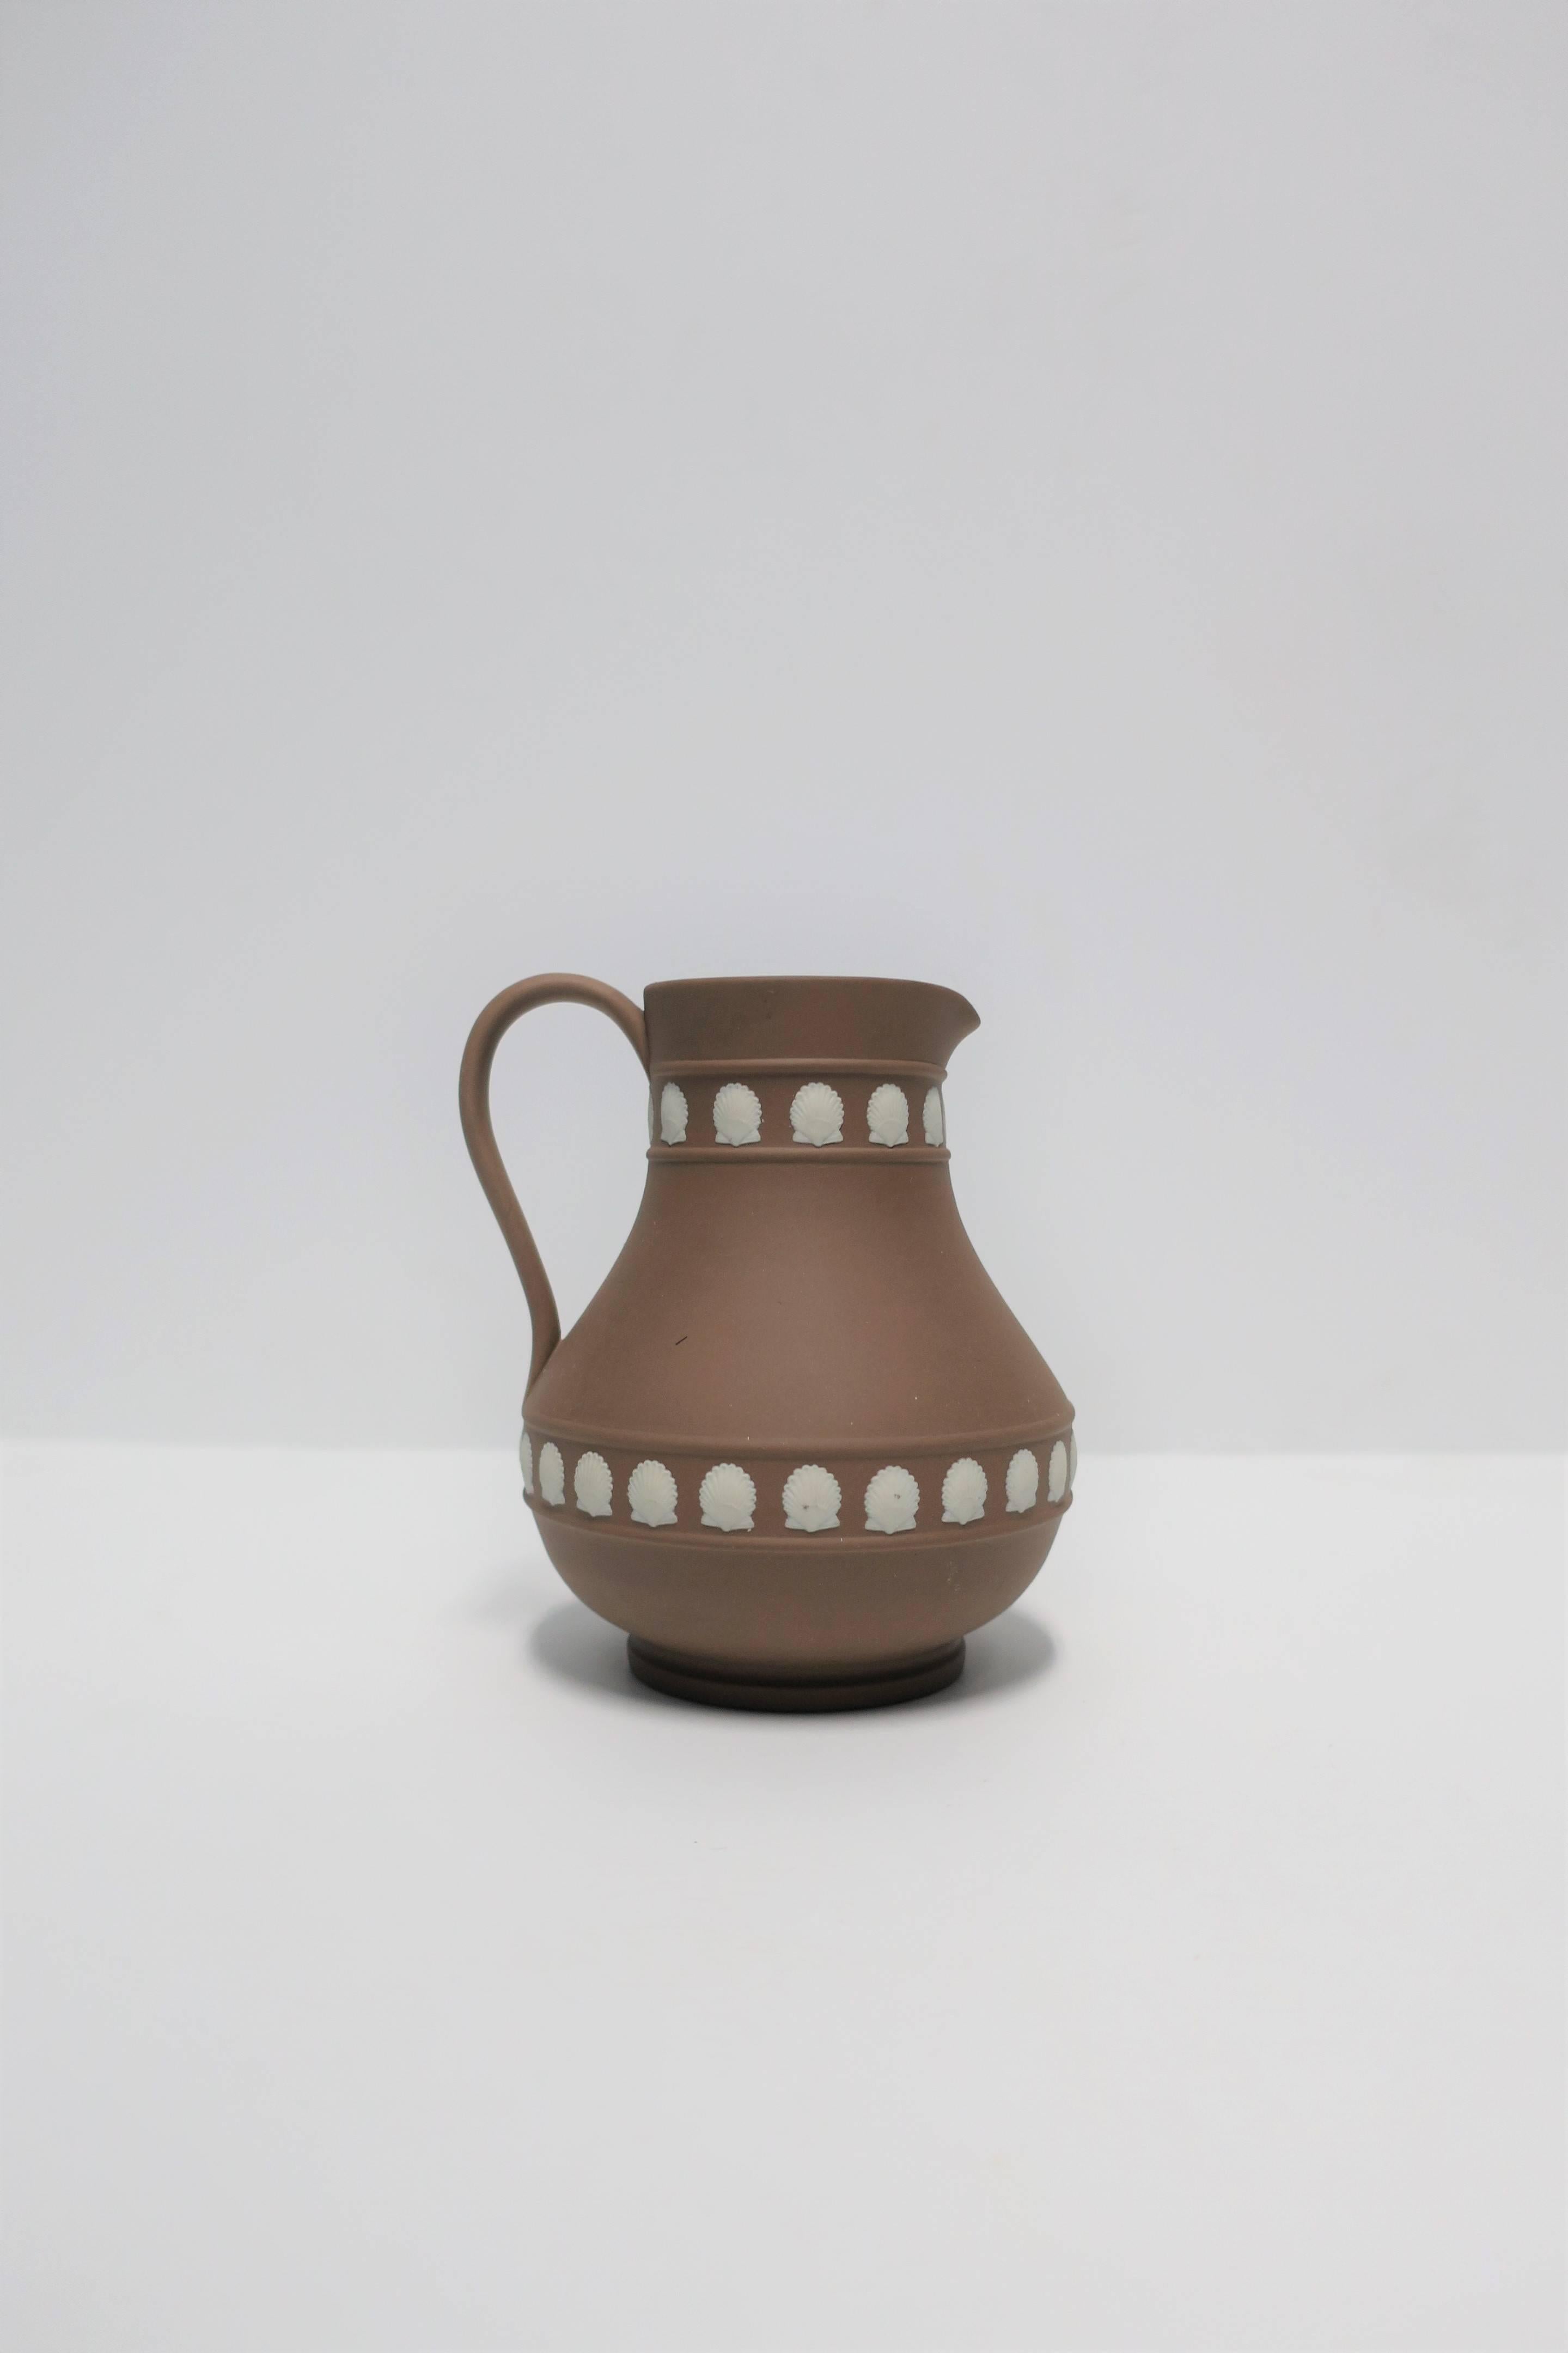 Late 20th Century English Wedgwood Jasperware Pitcher Vessel with Oyster Seashell Design